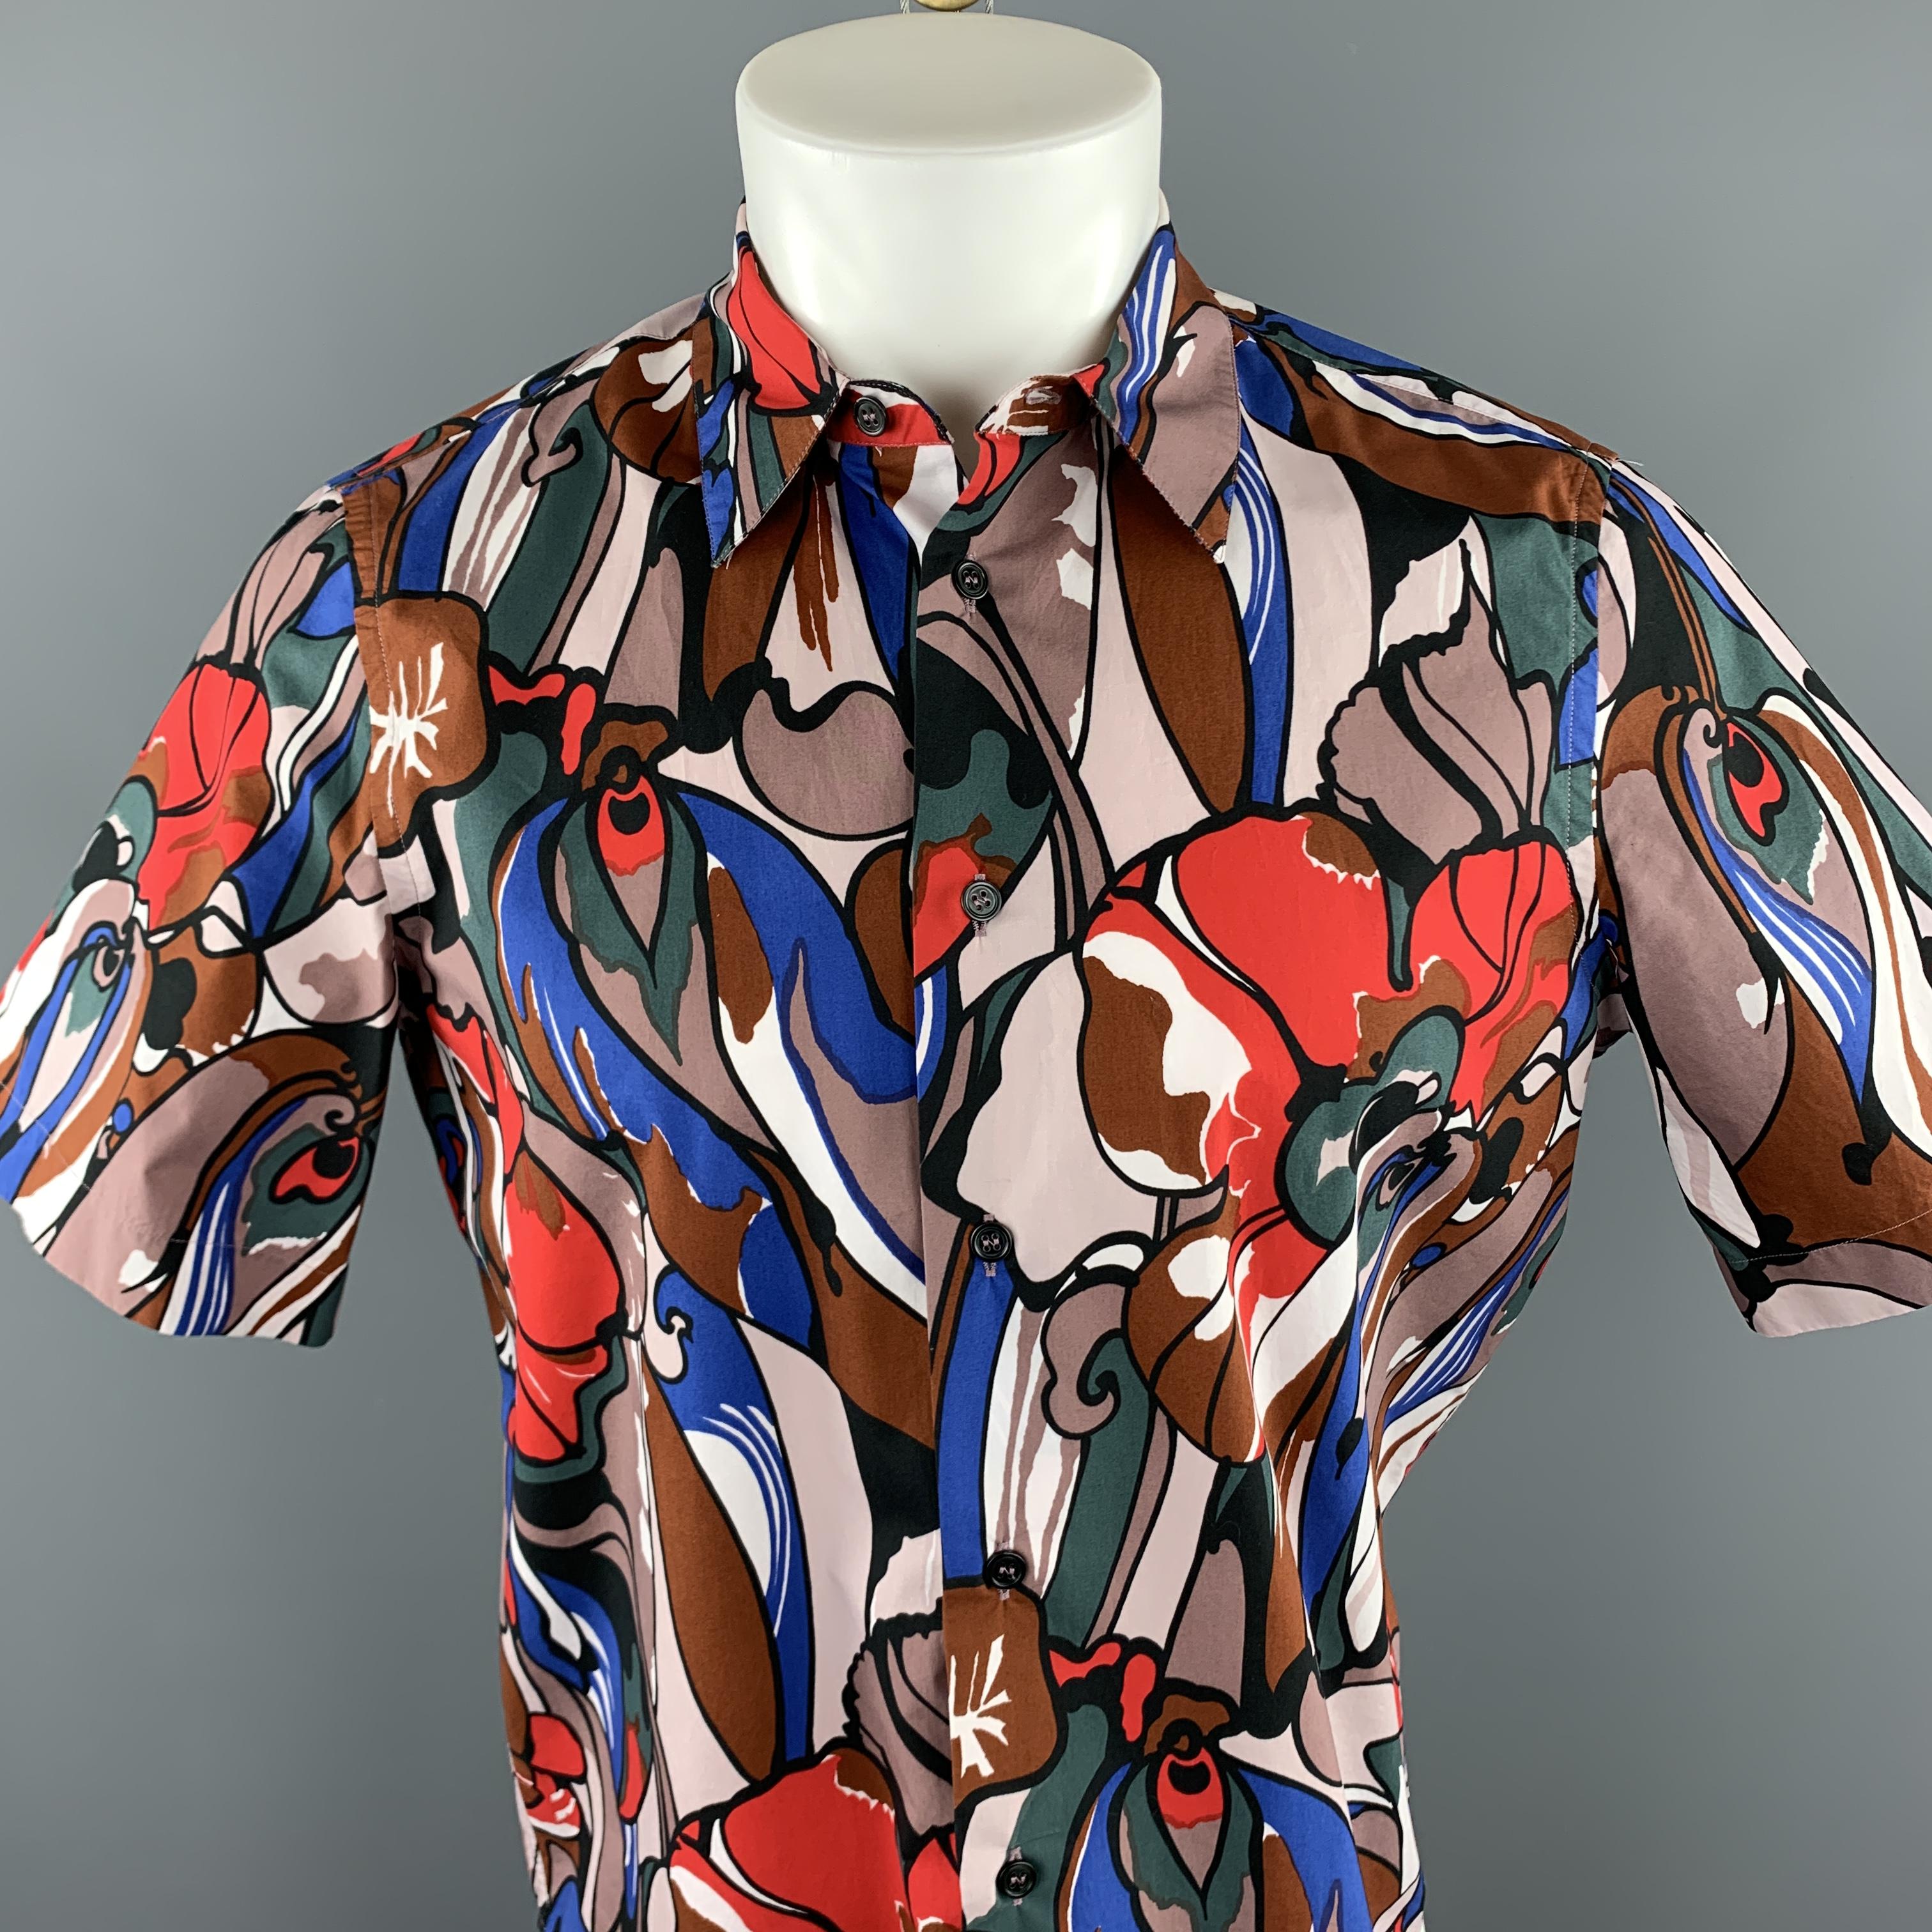 MARNI short sleeve shirt comes in a multi-color print cotton featuring a button up style and a spread collar. Made in Italy.

Excellent Pre-Owned Condition.
Marked: IT 48

Measurements:

Shoulder: 15 in. 
Chest: 41 in. 
Sleeve: 10.5 in. 
Length: